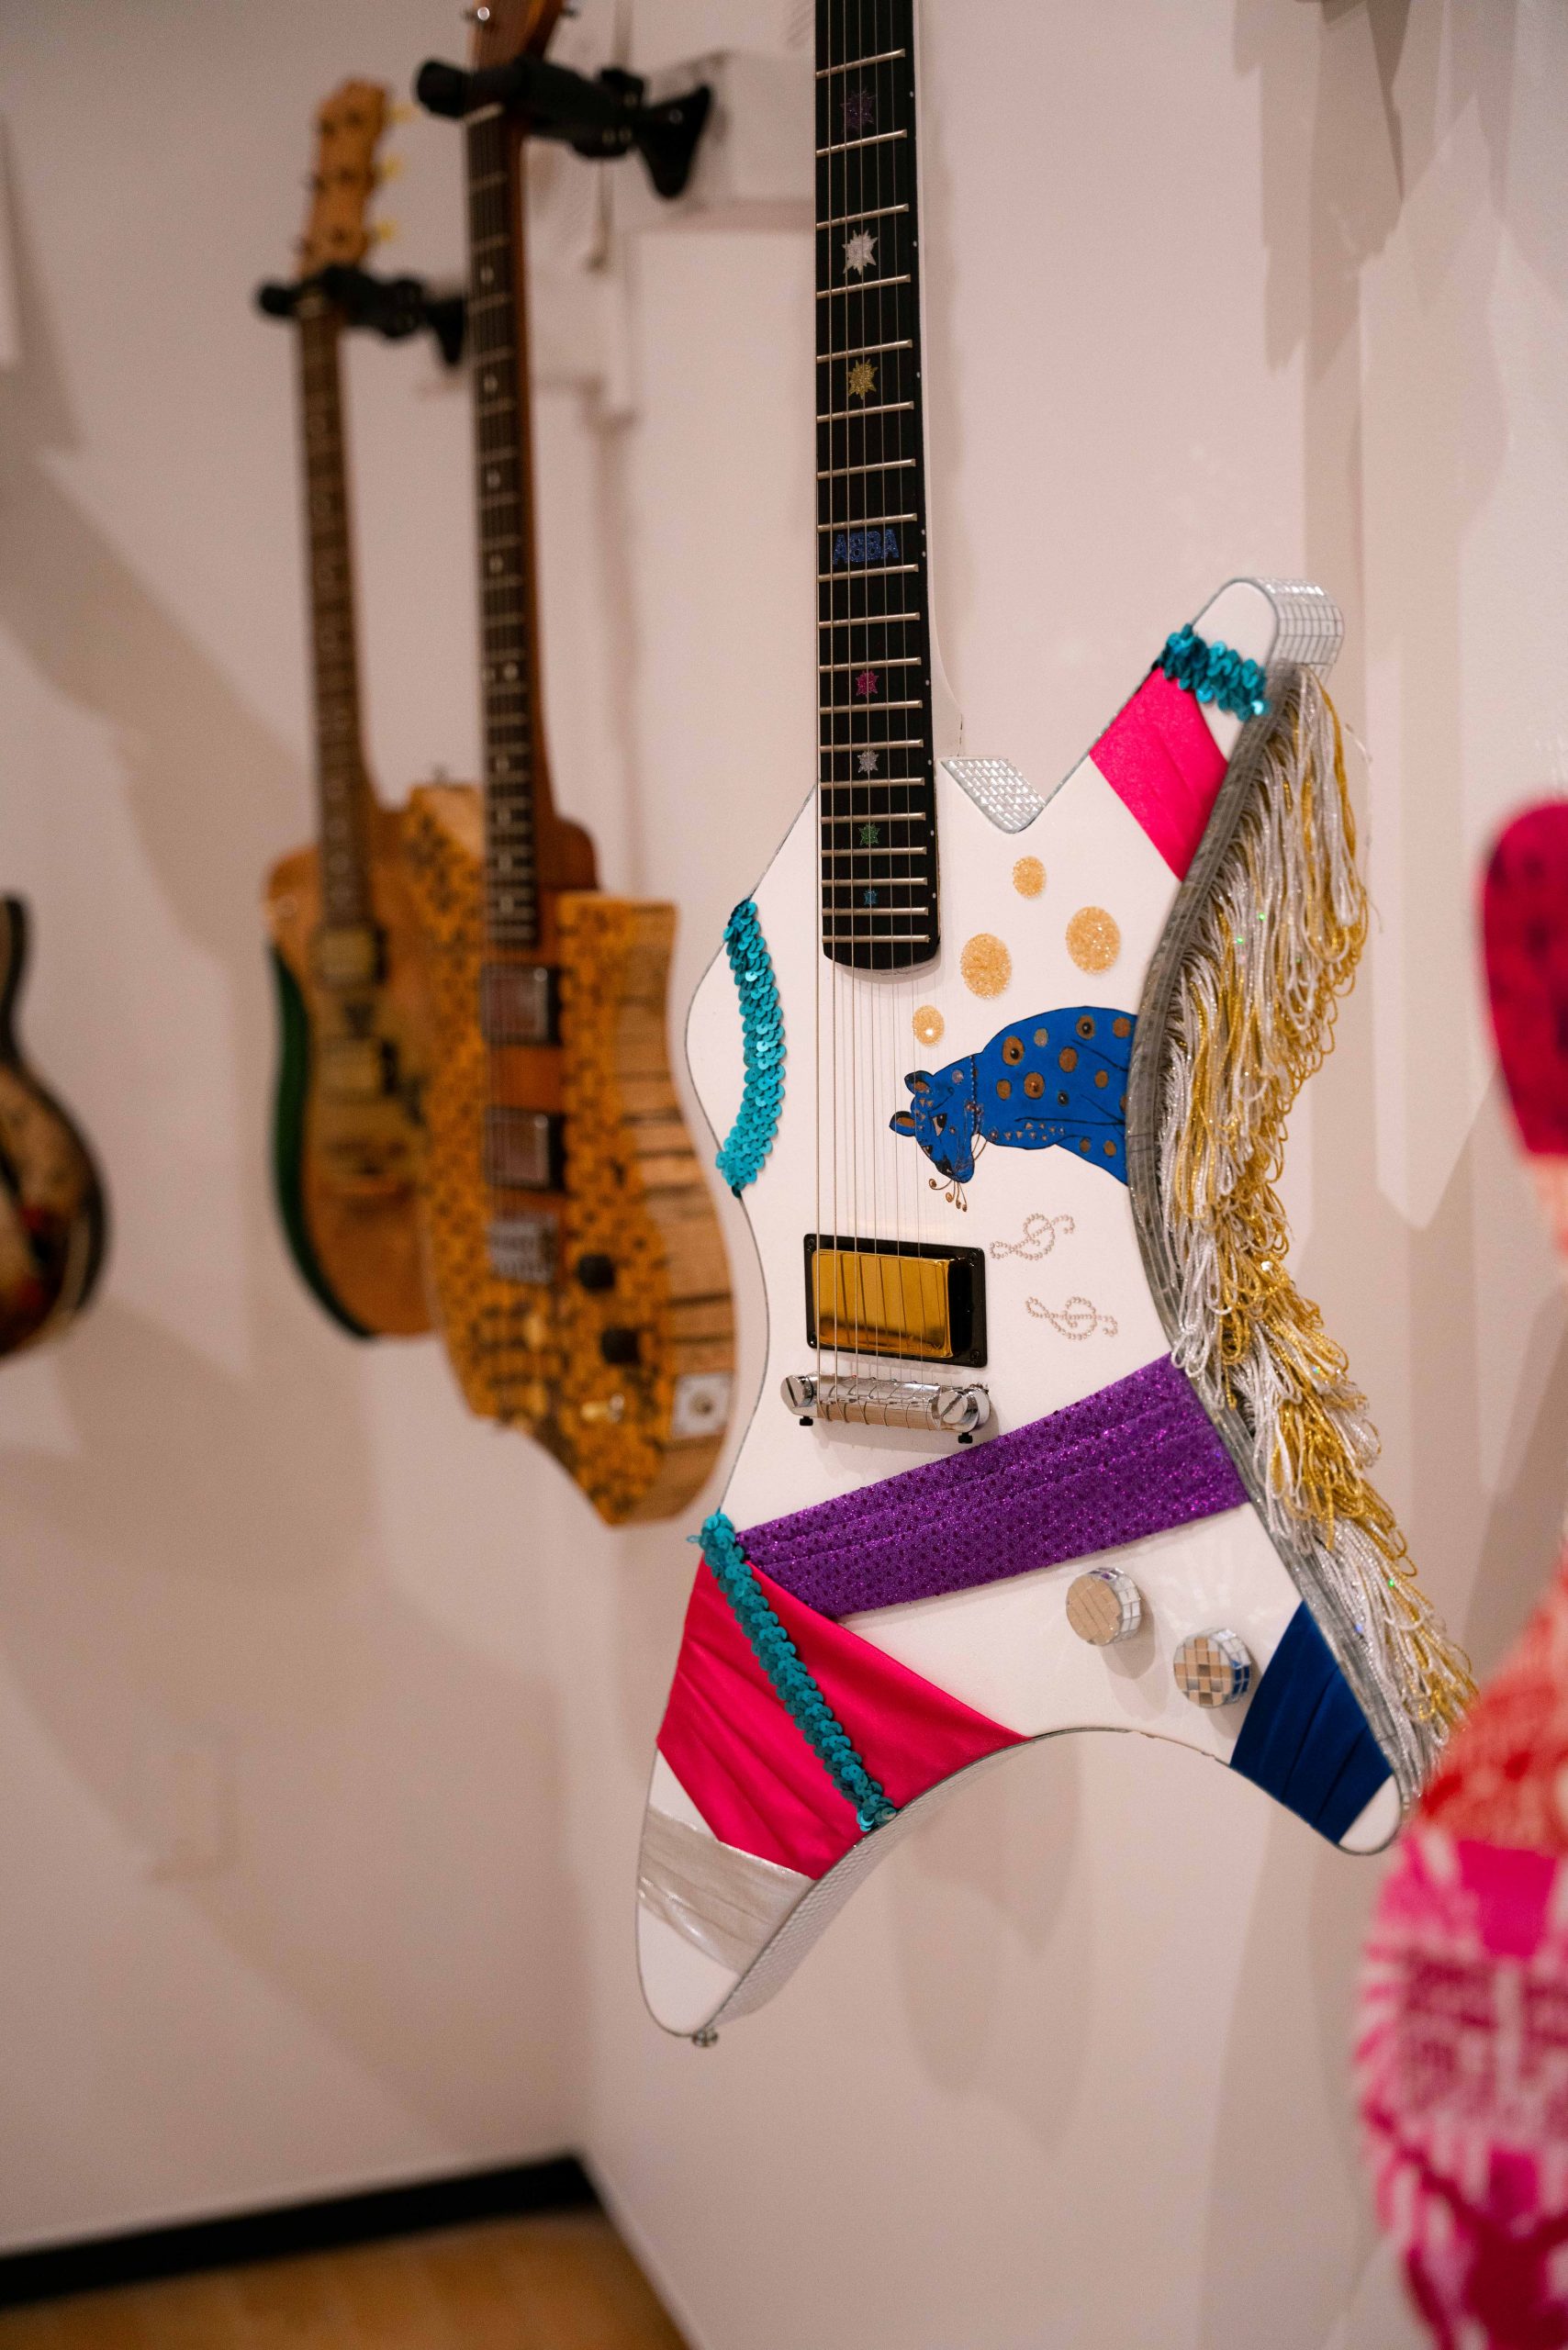 A colorful electric guitar decorated with bright fabric and tassels